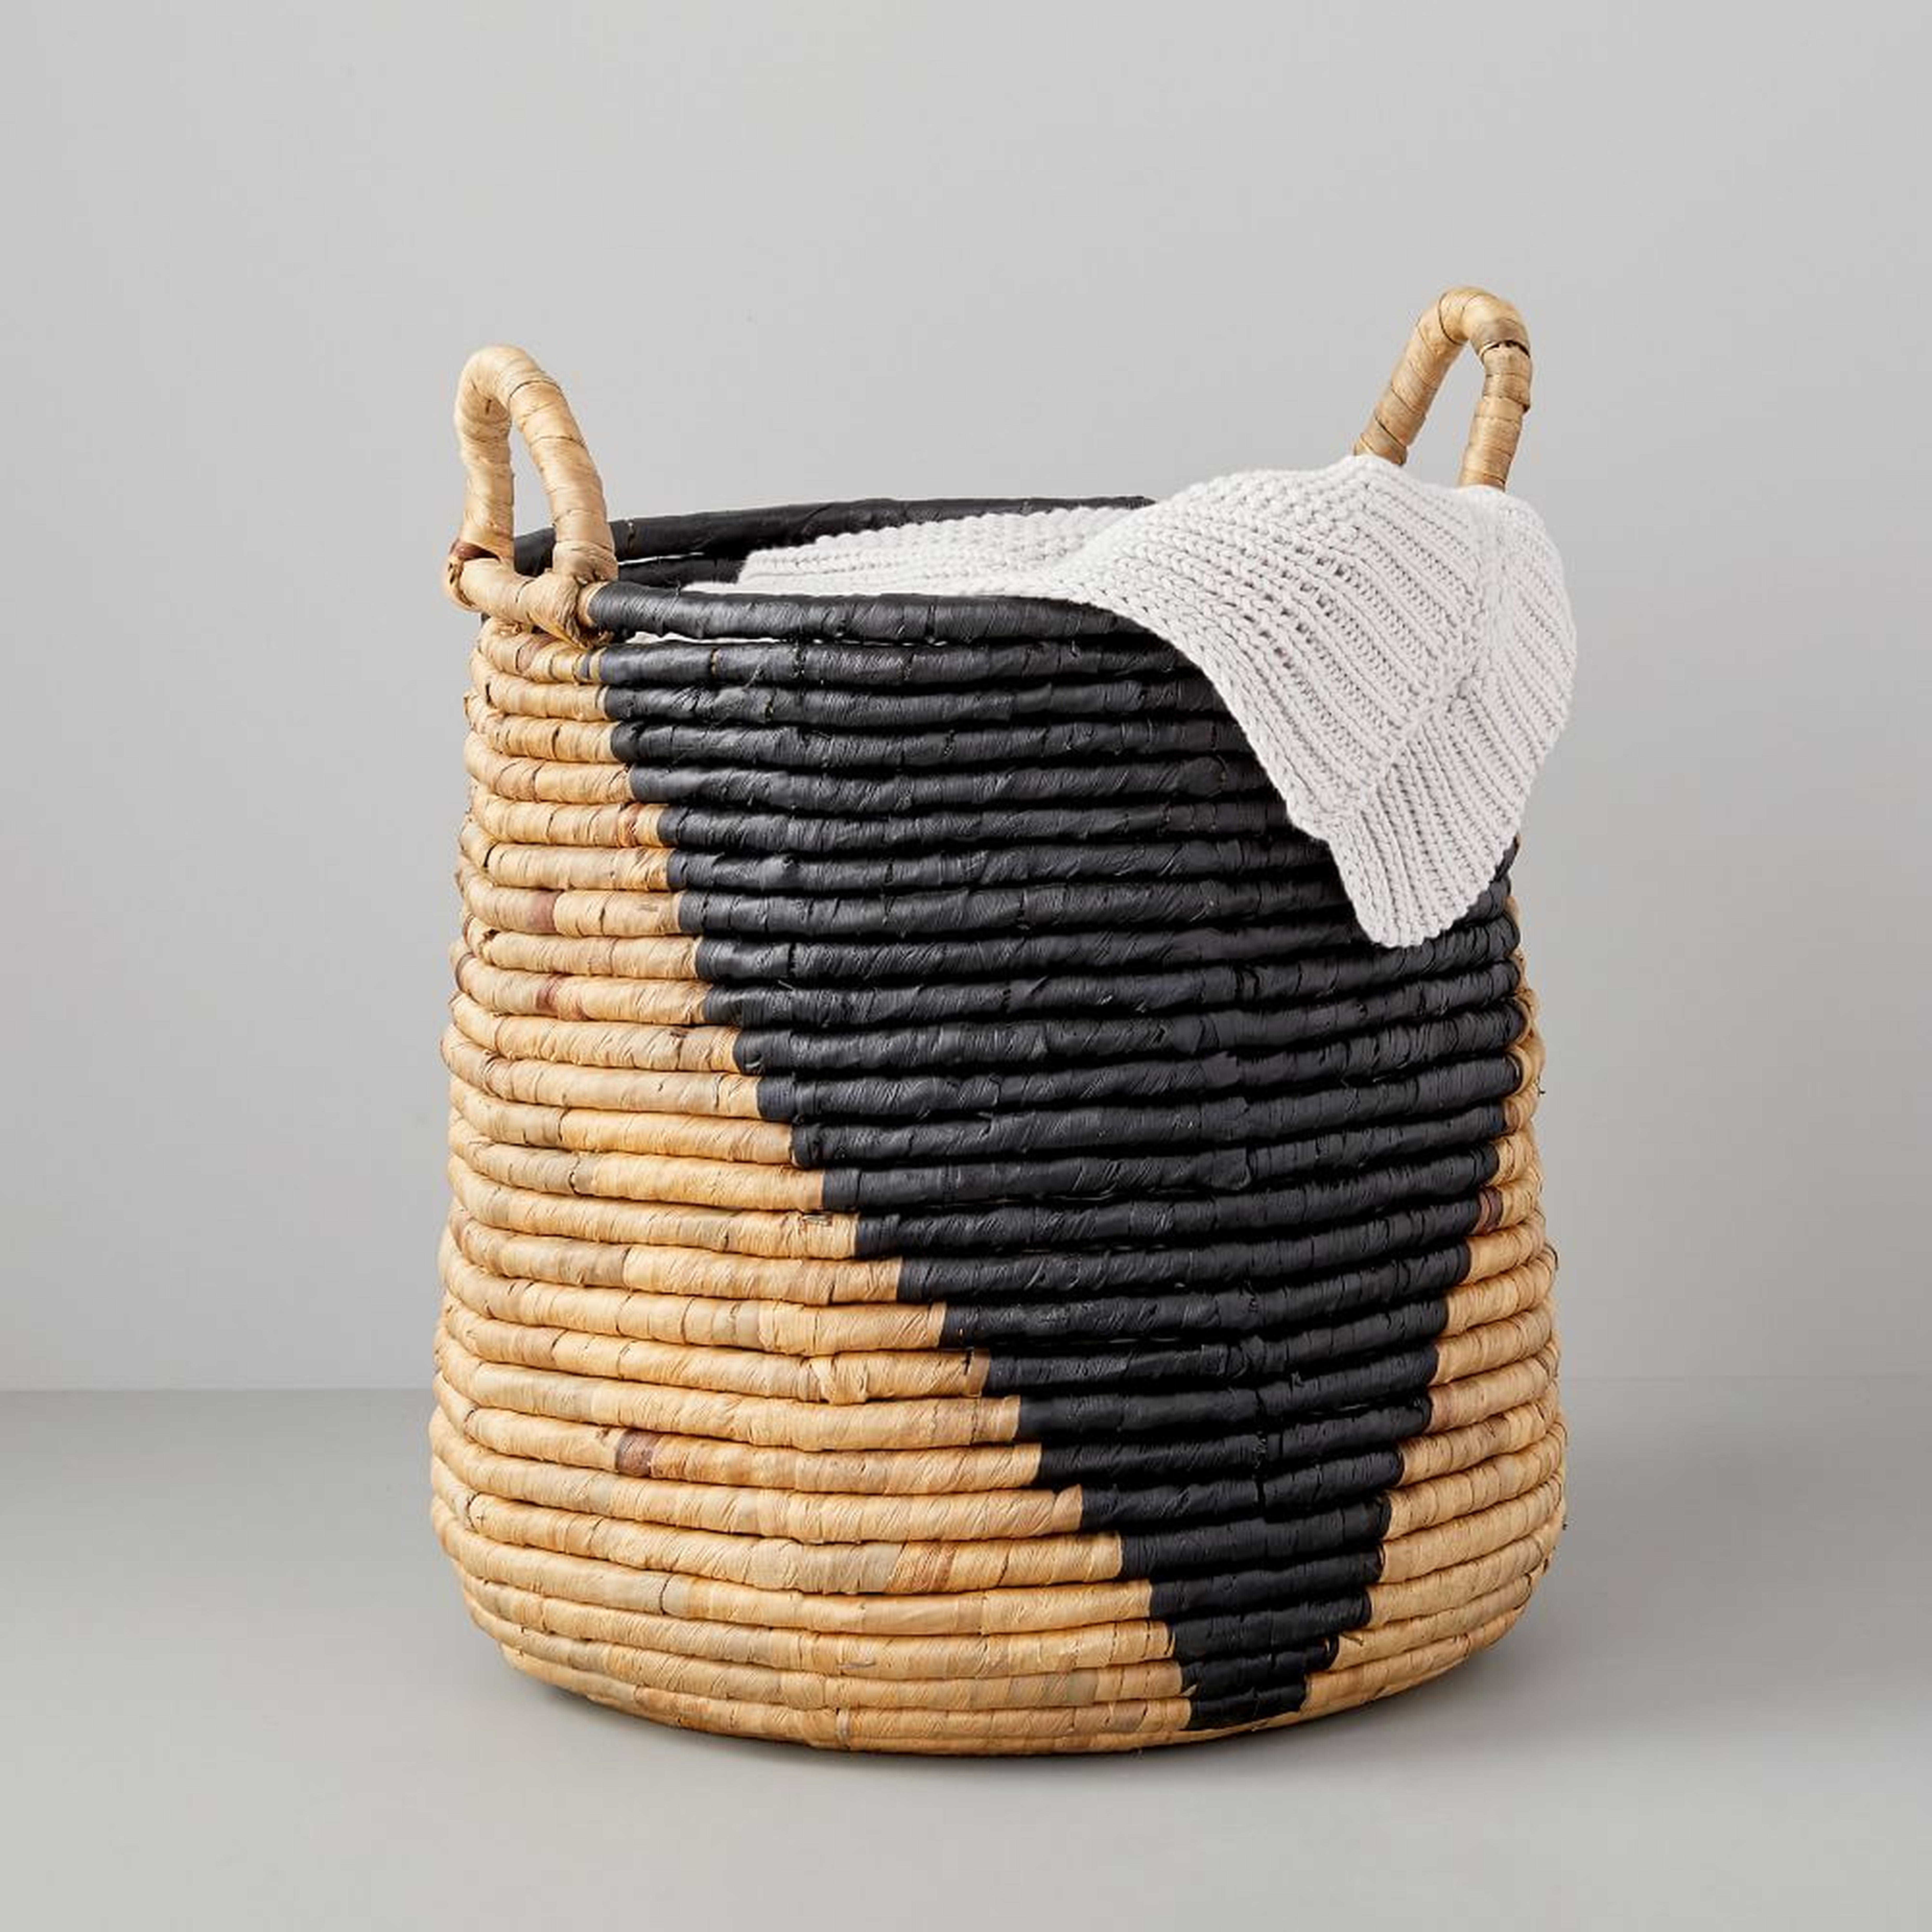 Two-Tone Woven Seagrass, Round Handle Baskets, Tall, 16.1"D x 15.7"H - West Elm